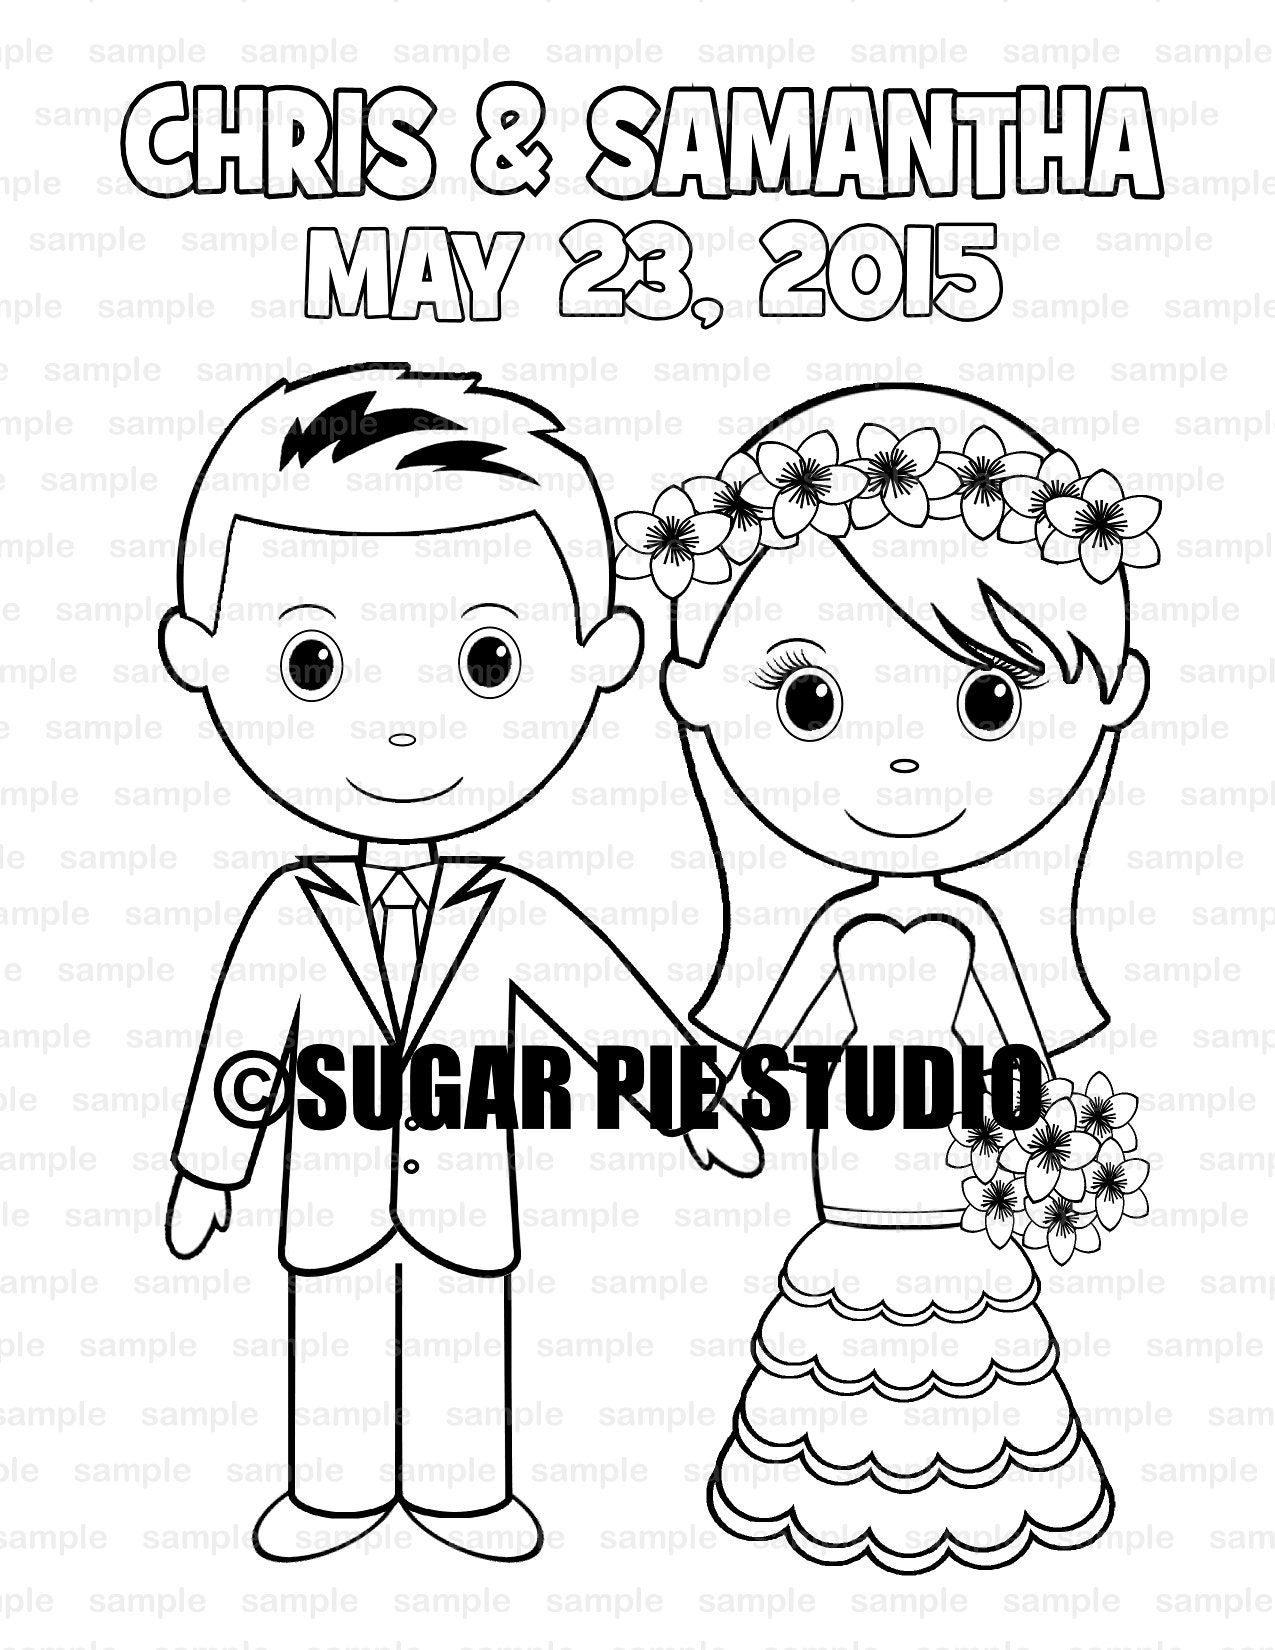 Download Wedding coloring page activity Personalized Printable PDF or | Etsy